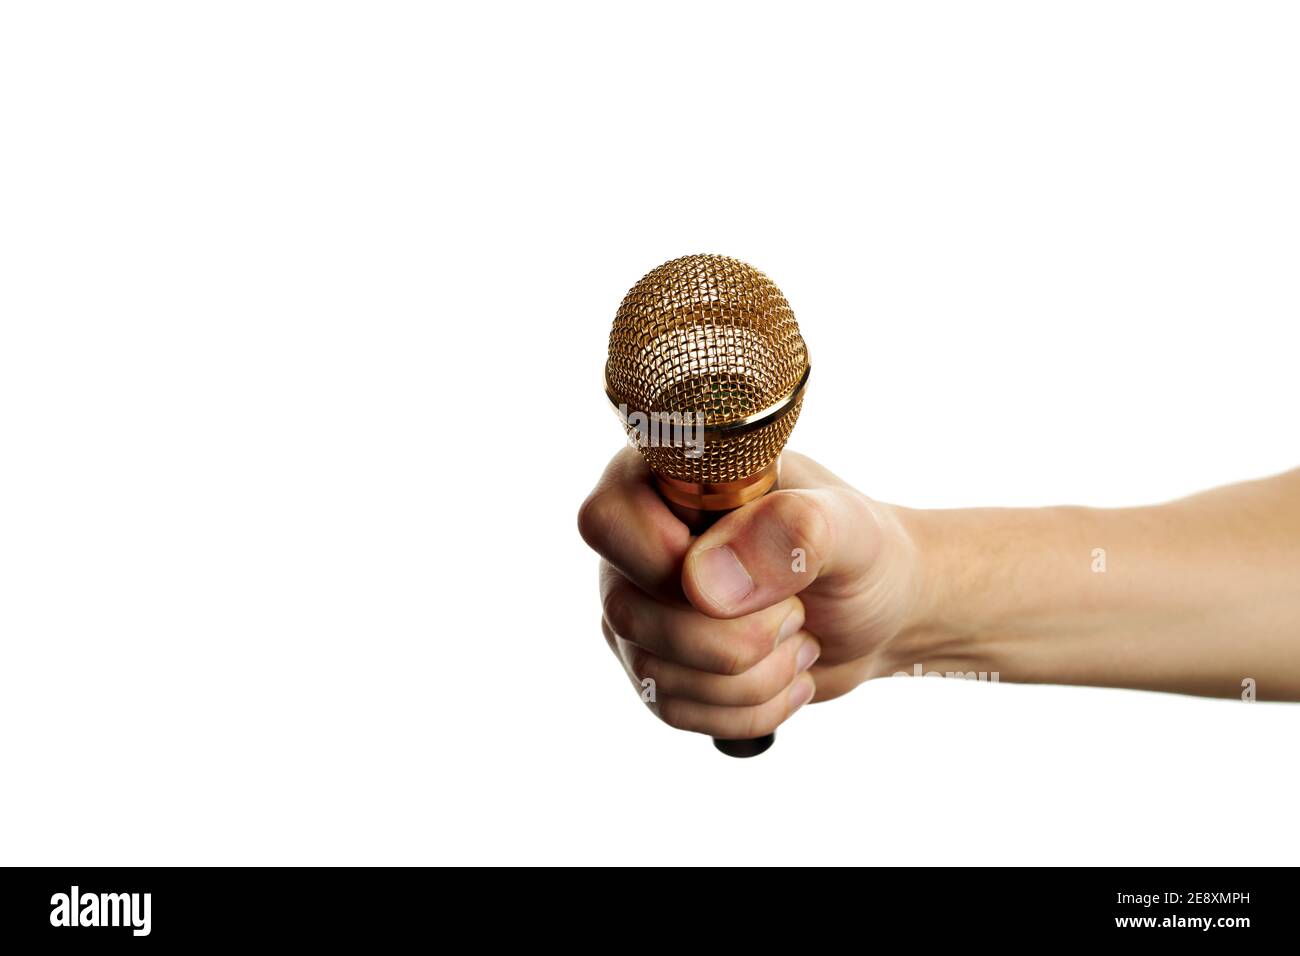 golden microphone in hand isolated on a white background. copy space. sound recording equipment. Stock Photo